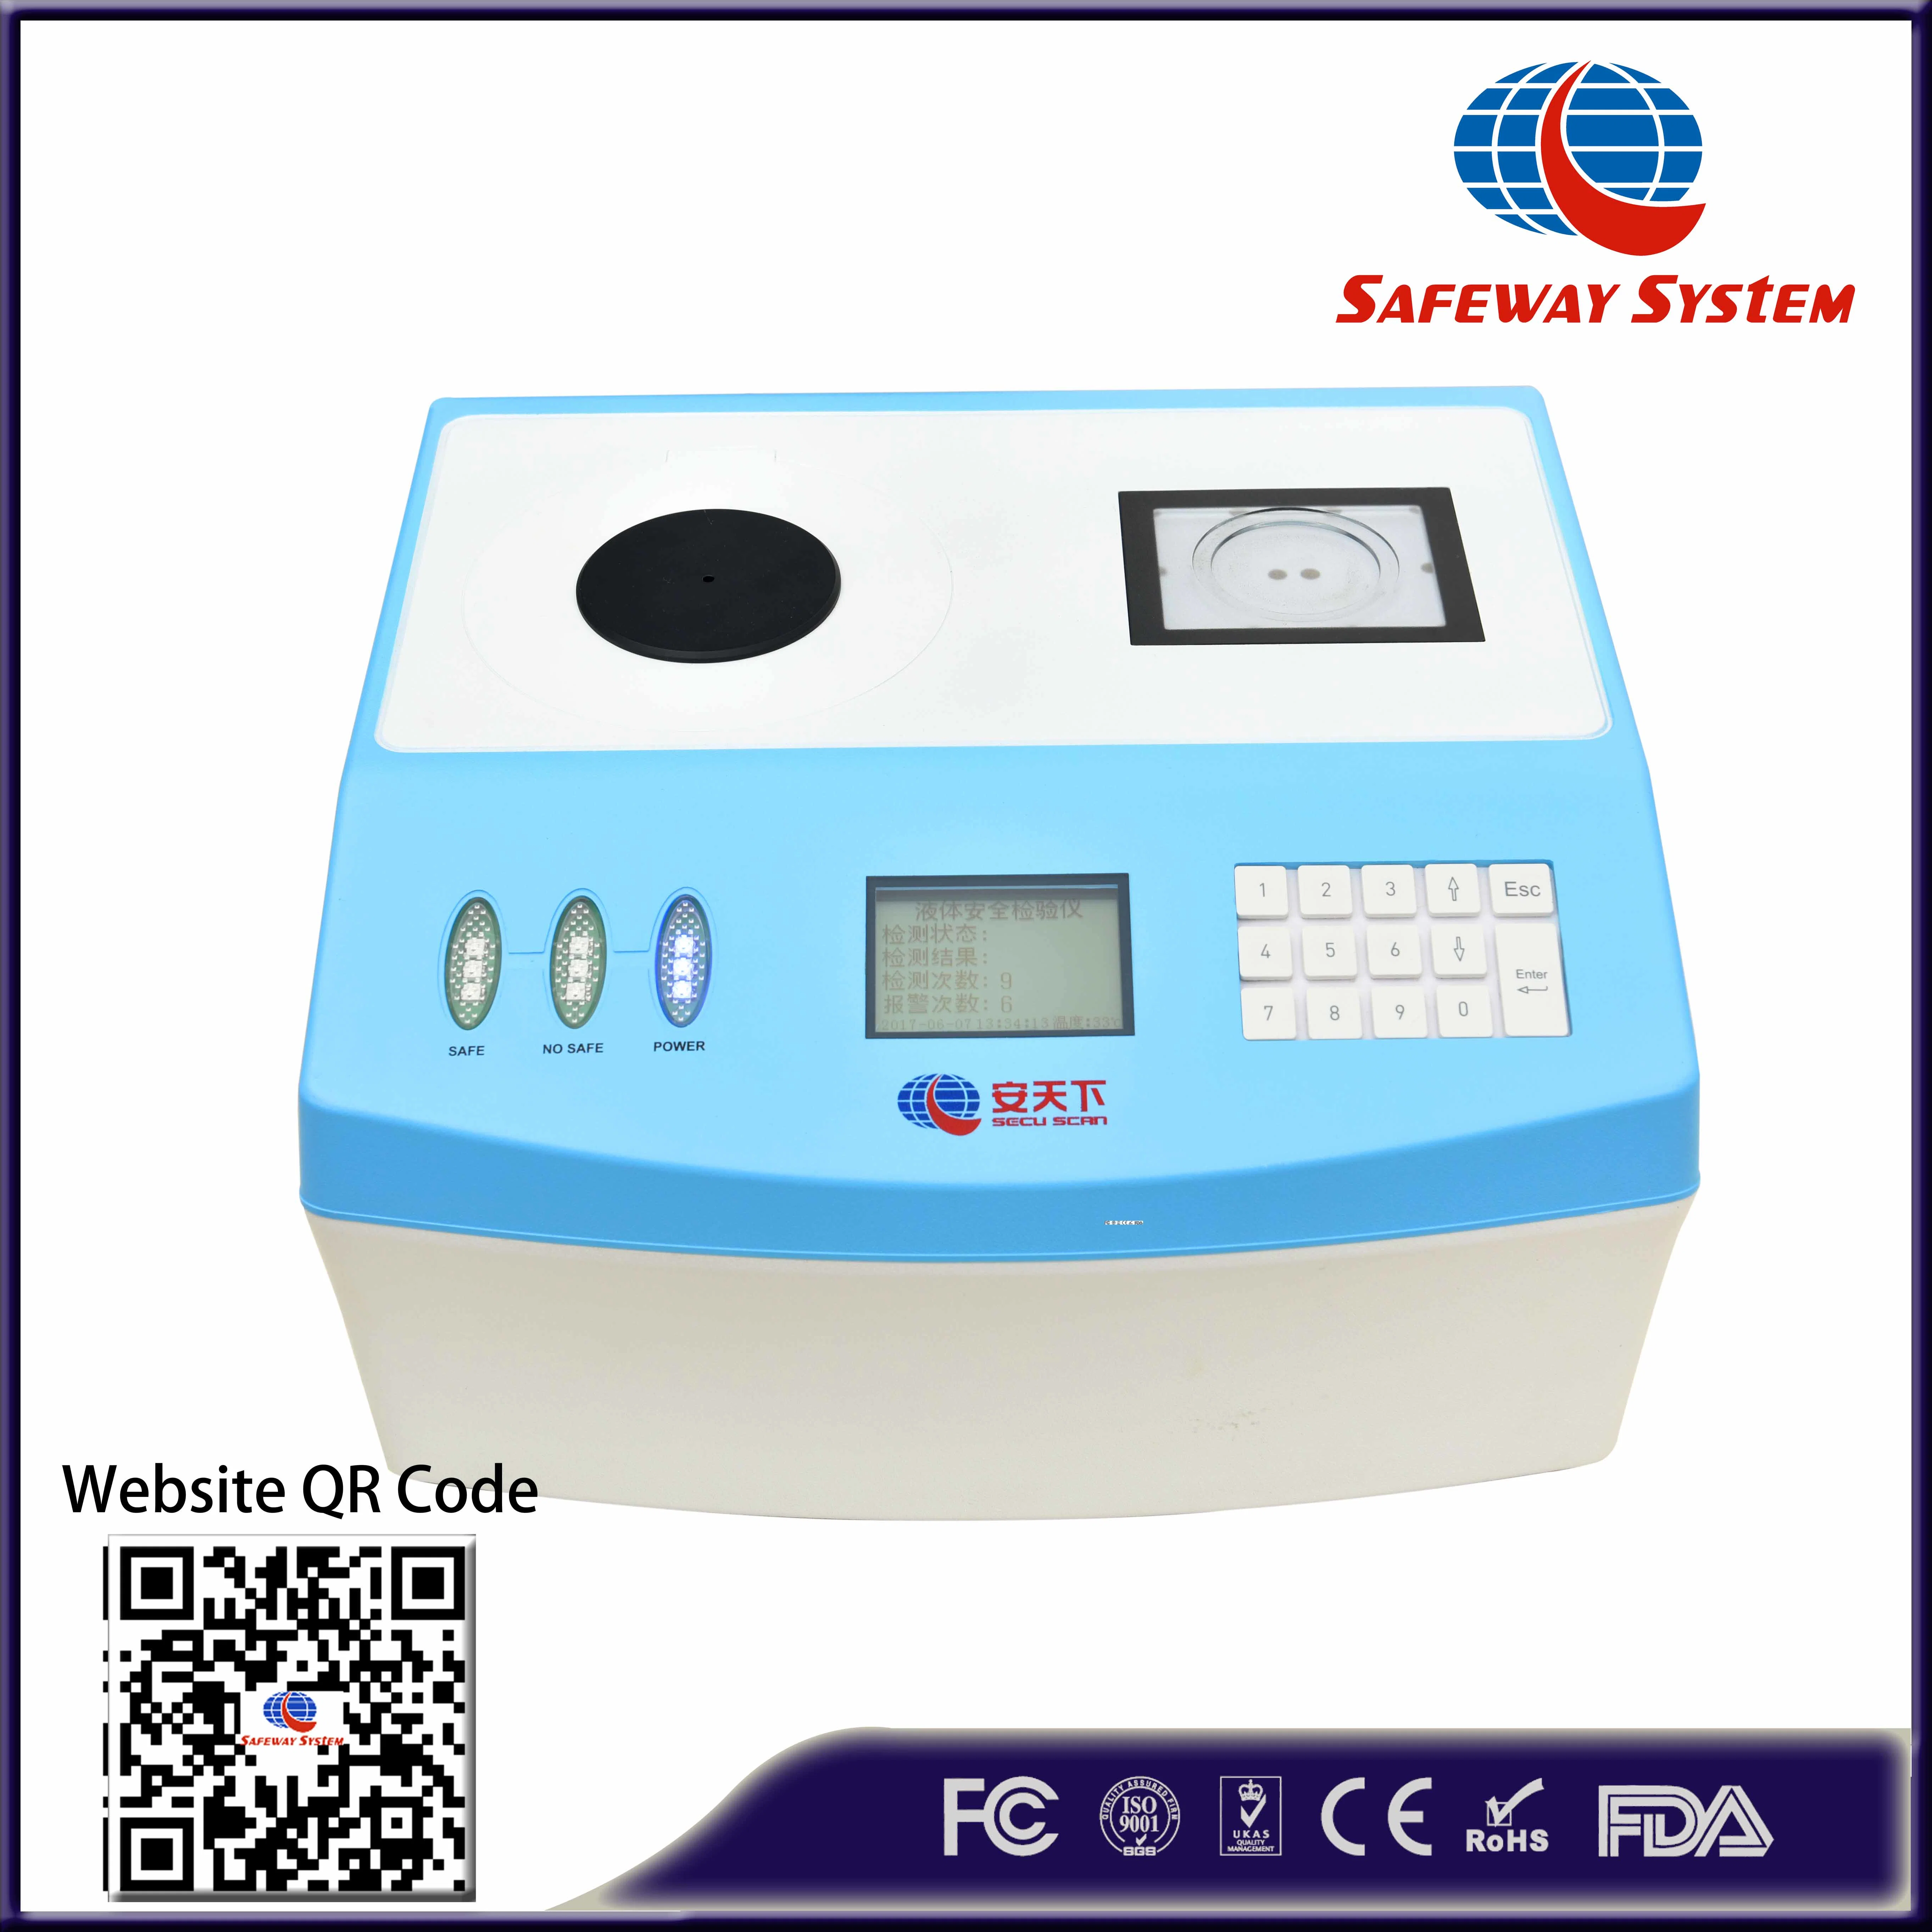 New Stationery Desktop Dangerous Liquid Explosive Detector, Liquid Scanner Liquid Trace Detector Direct Factory in China with Copyrights and Patents